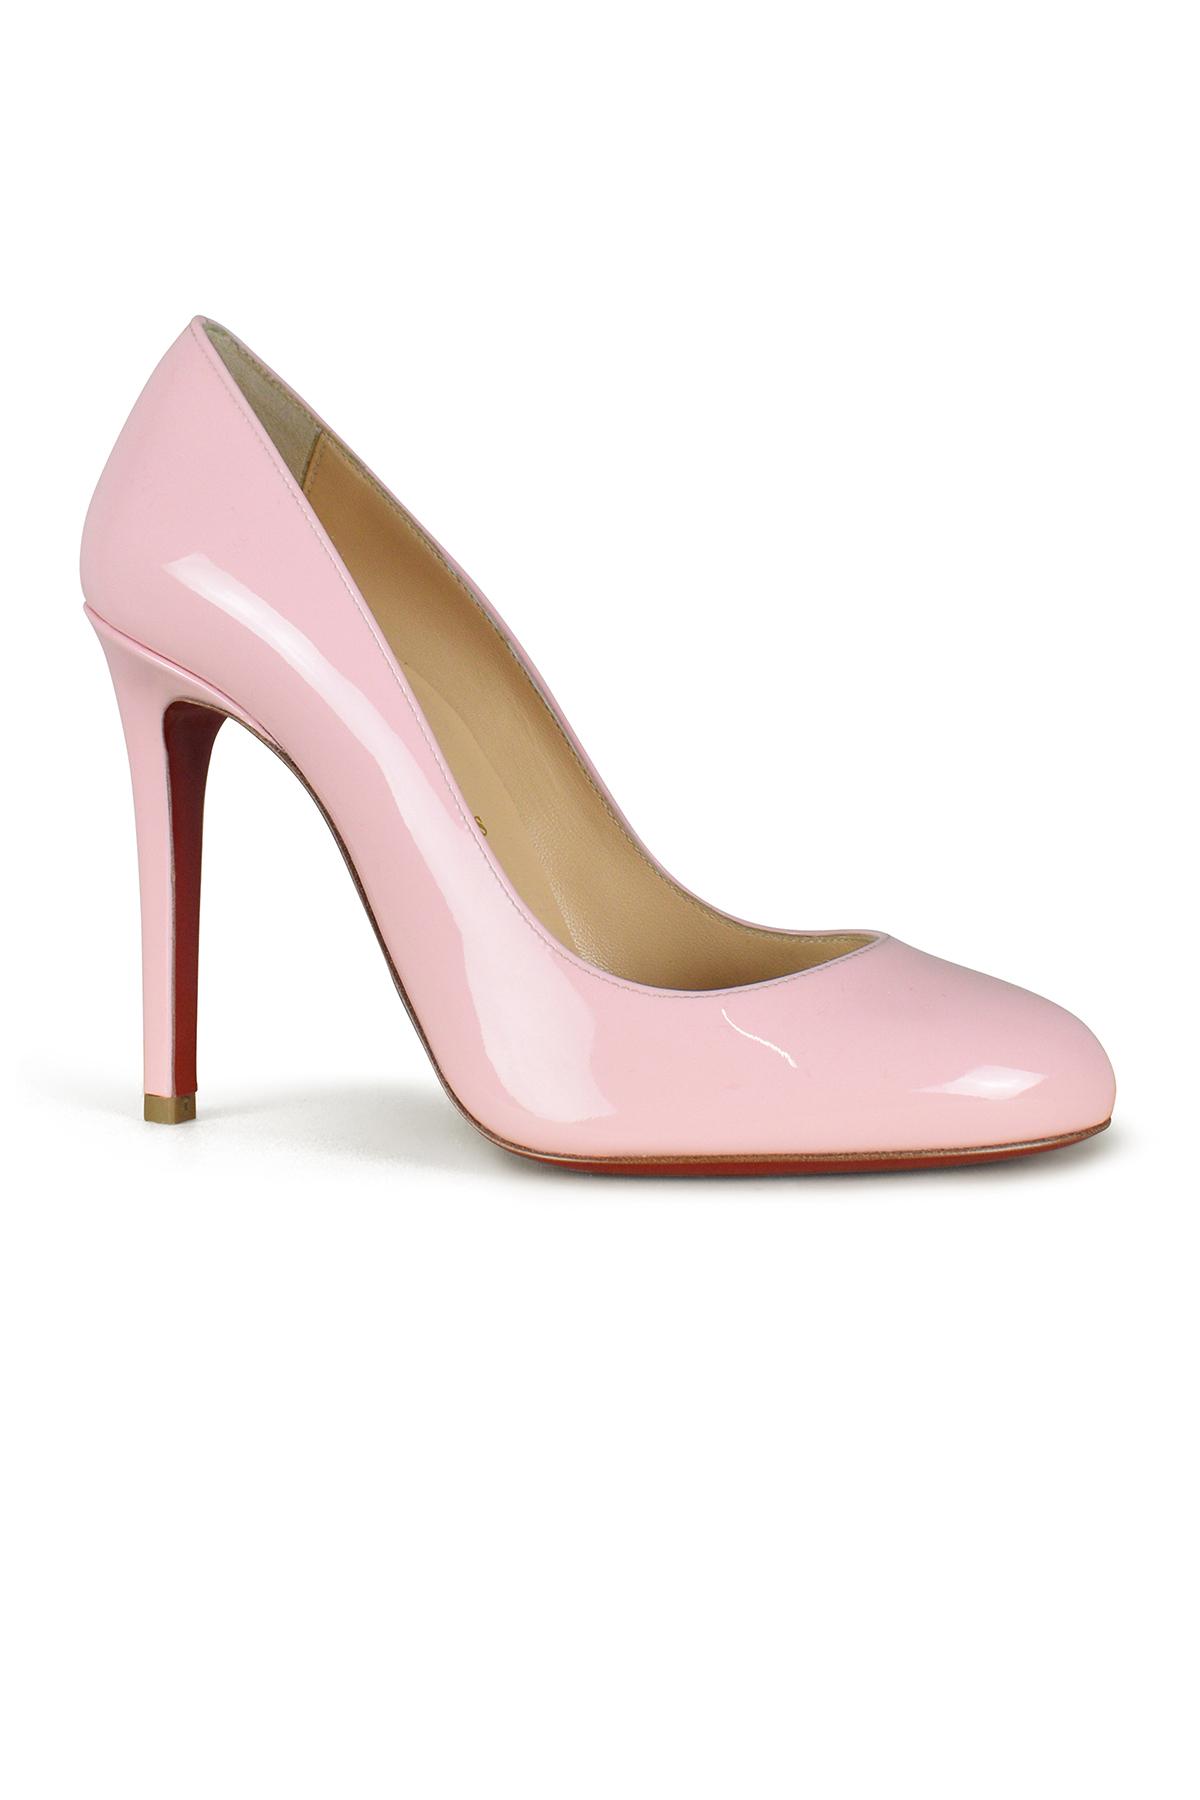 Christian Louboutin Fifille Pumps 100 in Pink - Lyst